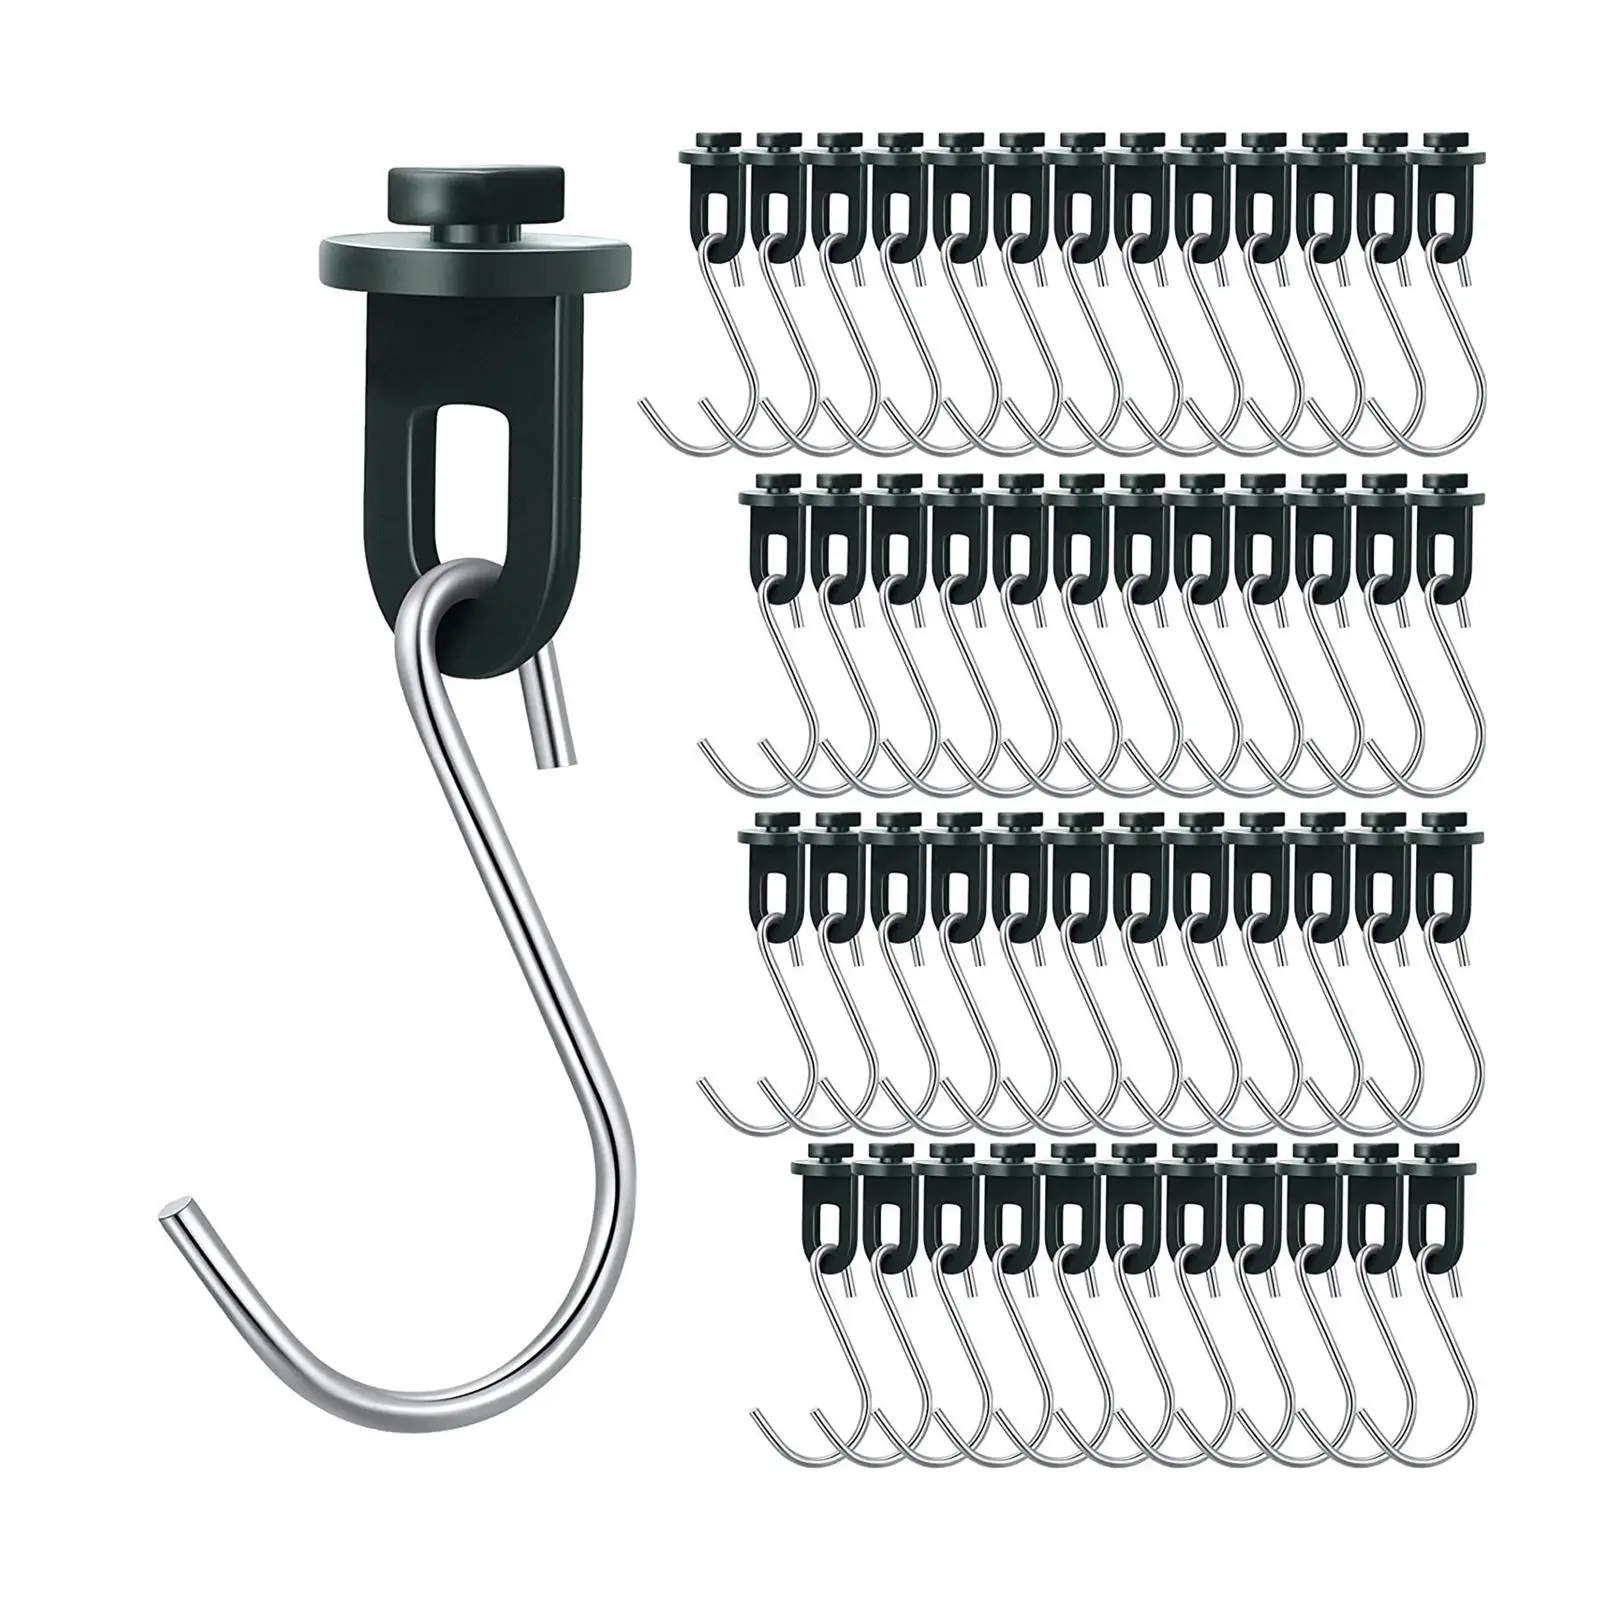 50Pcs Greenhouse Hooks hanger Saving Stainless Steel Hanging Plants Greenhouse Fixing Clips for Handbag Outdoor Clothes